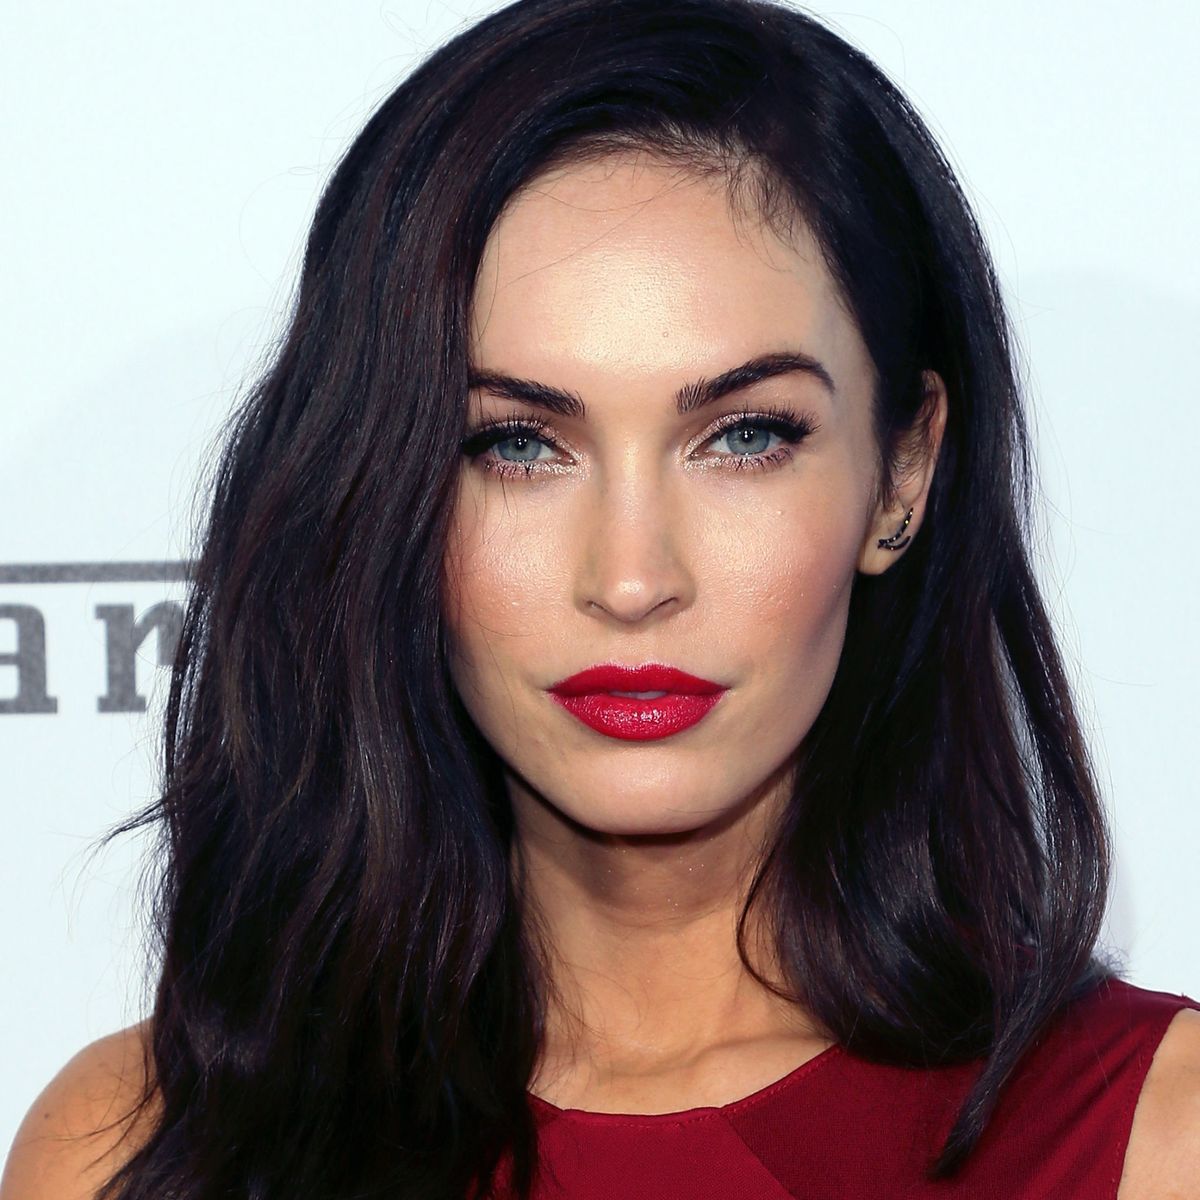 Megan Fox Is an Original DGAF Celebrity and It's Time She Gets Your Respect